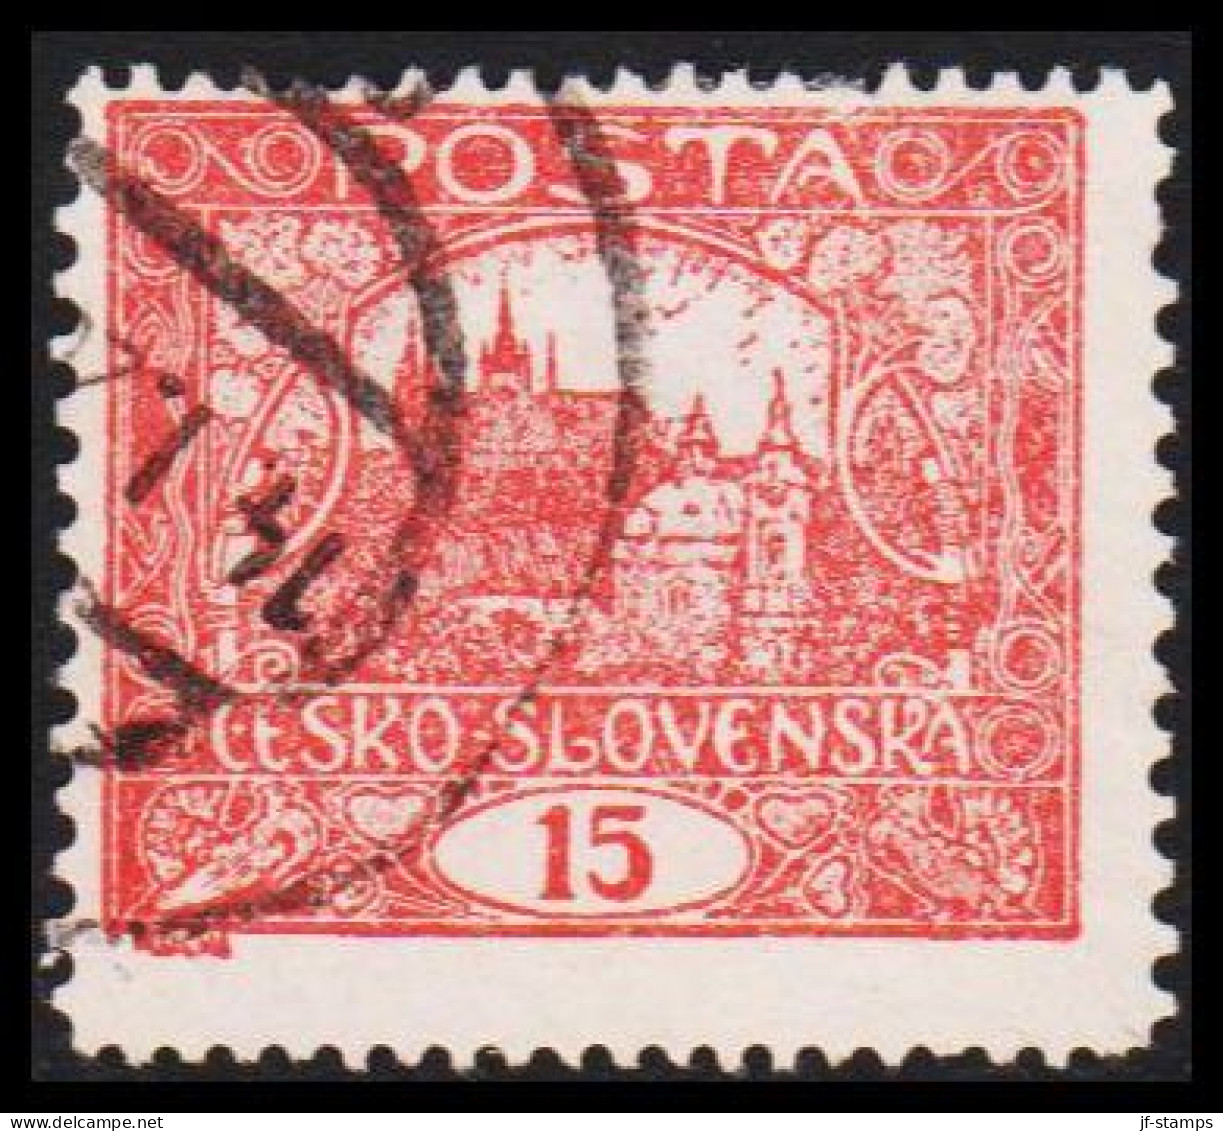 1919. CESKOSLOVENSKO. Hradschin. 15 Heller. Perforated 13 3/4 X 11½.   (Michel 26 F) - JF540230 - Used Stamps